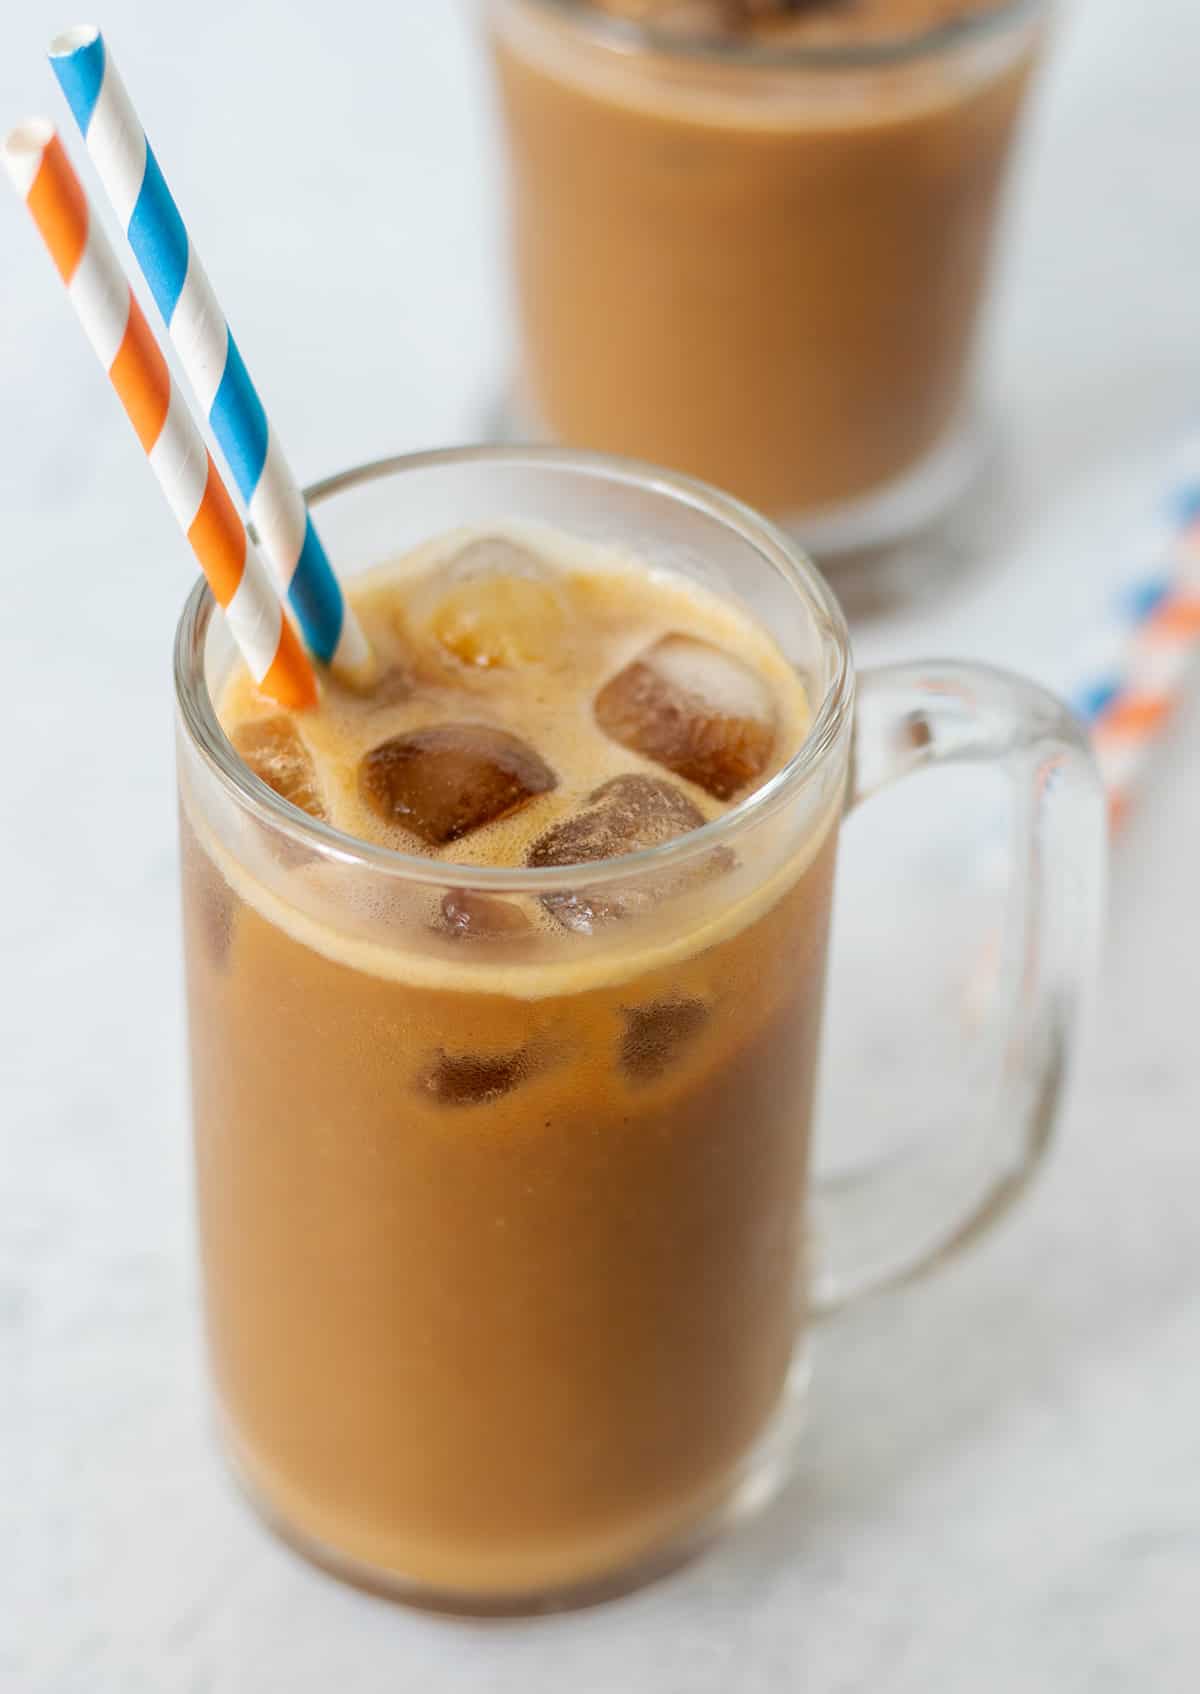 pumpkin coffee smoothie in a tall clear glass with ice. Two straws, one blue and white and one orange and white for serving.